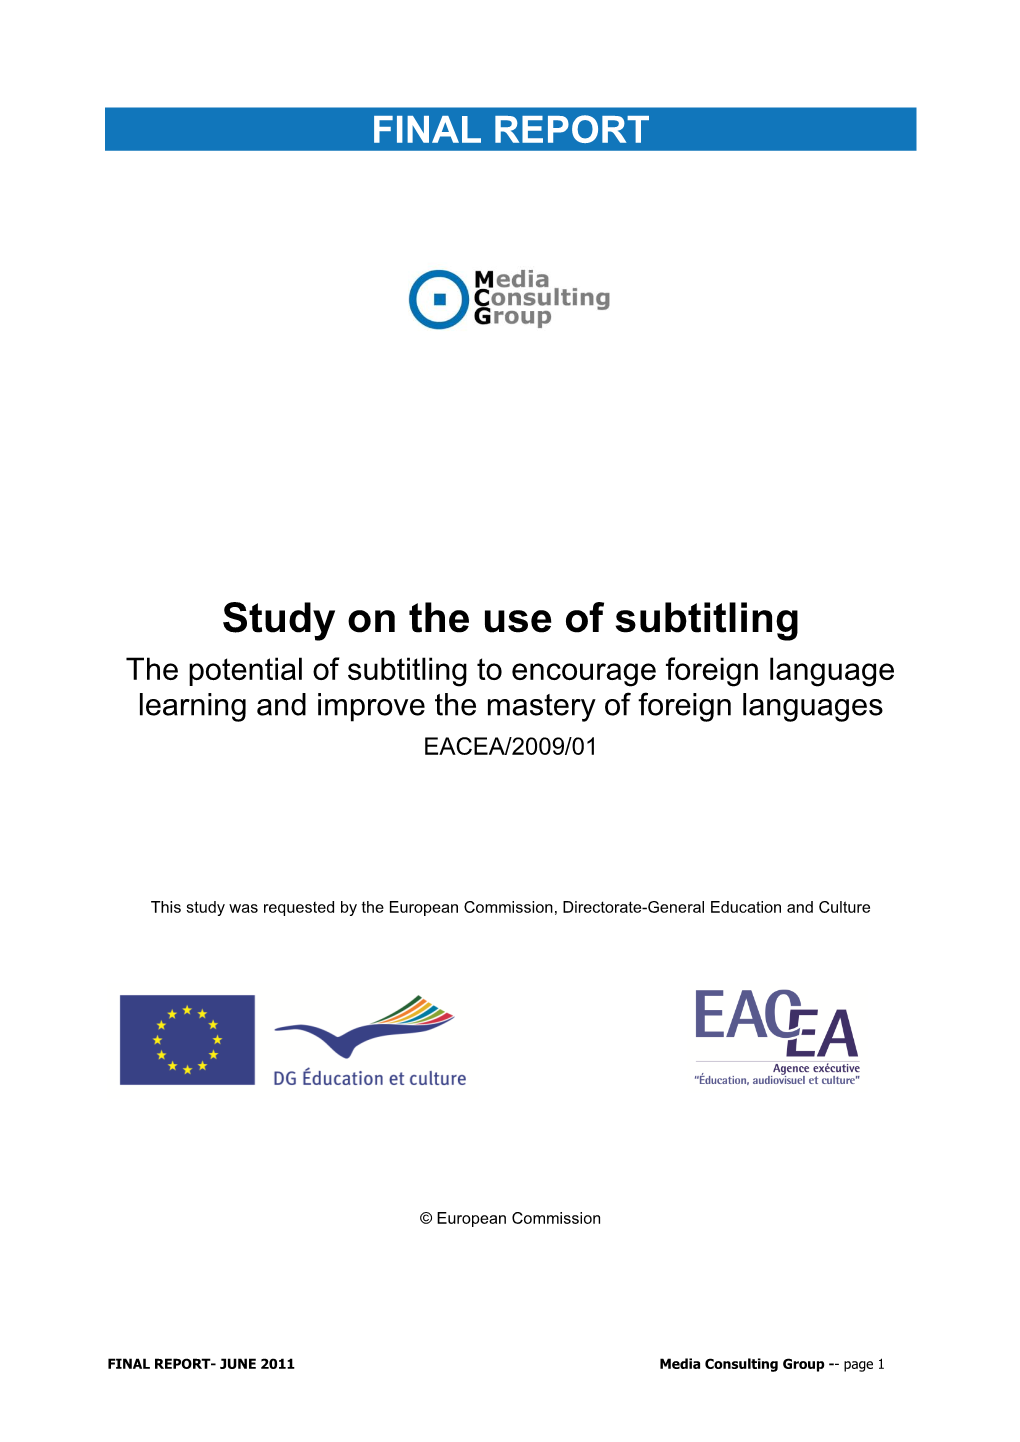 Study on the Use of Subtitling the Potential of Subtitling to Encourage Foreign Language Learning and Improve the Mastery of Foreign Languages EACEA/2009/01